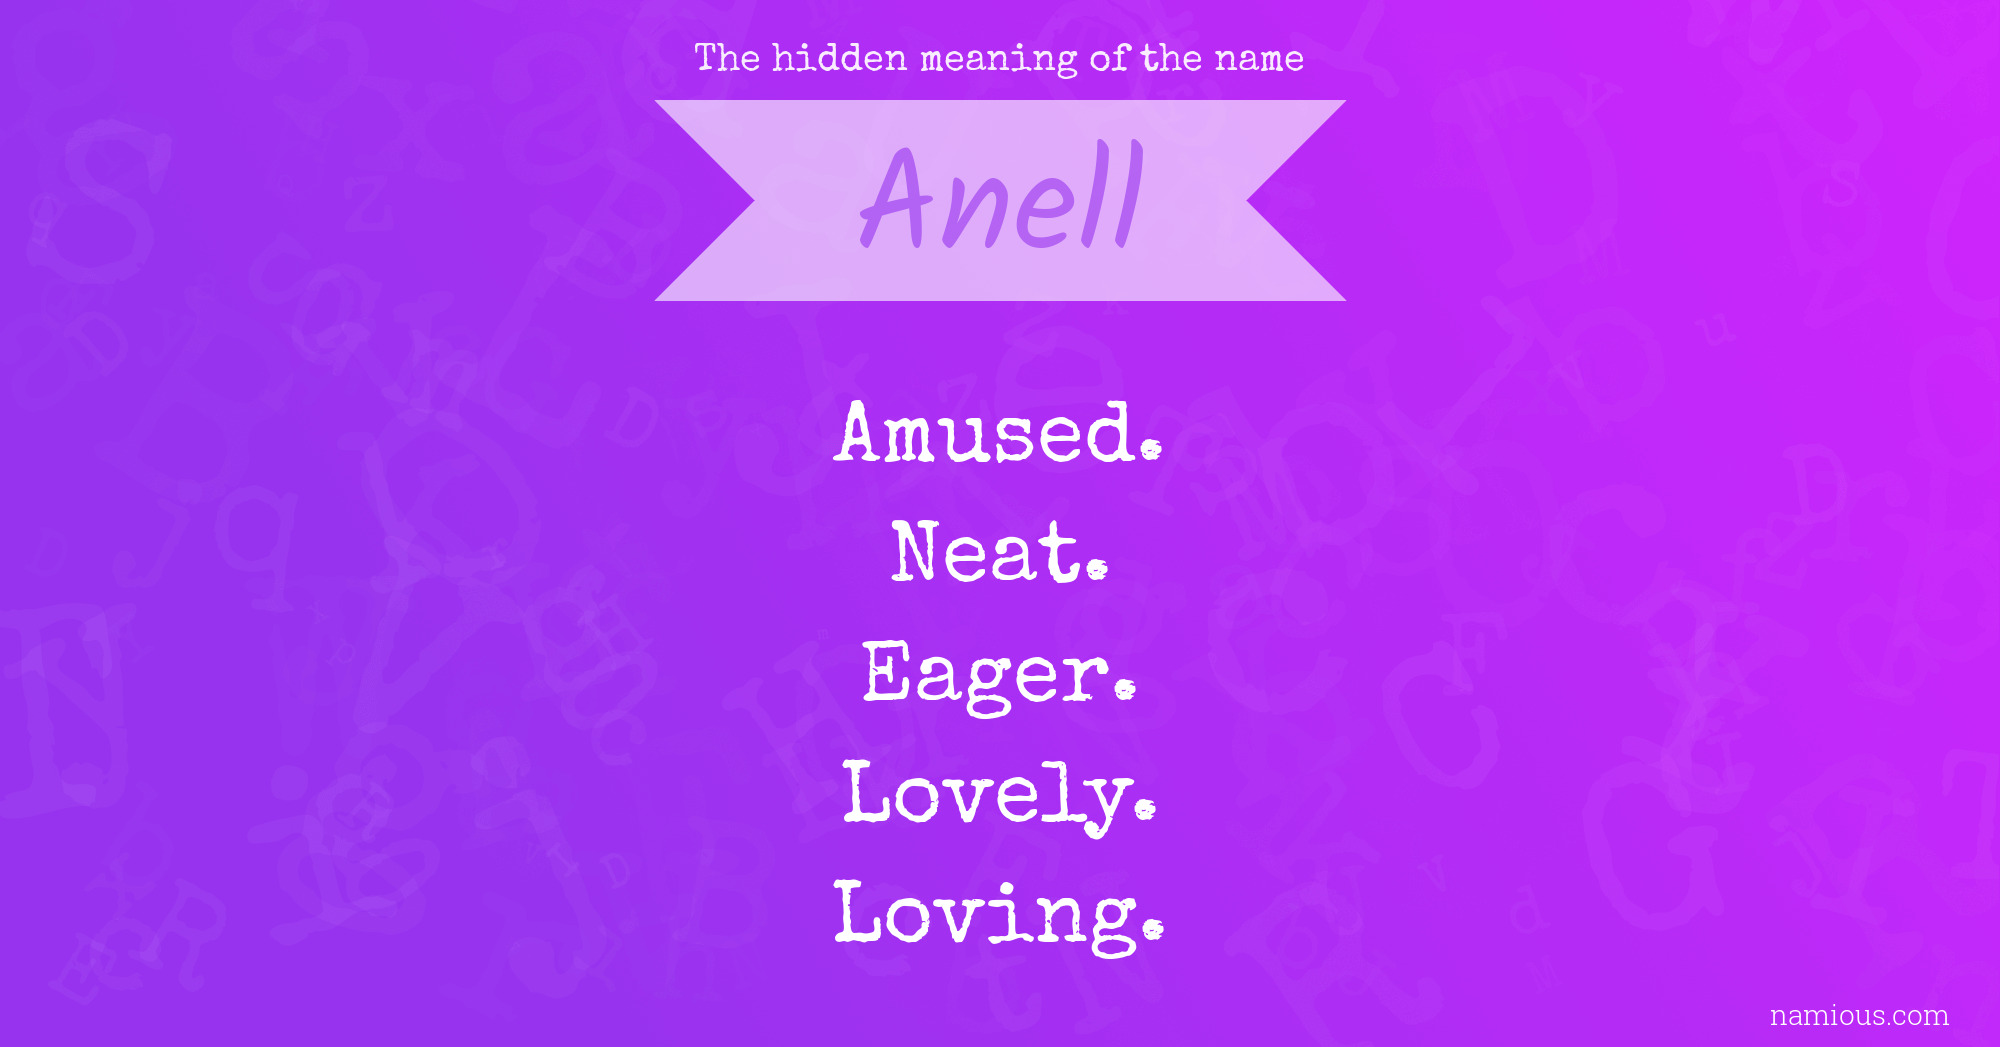 The hidden meaning of the name Anell